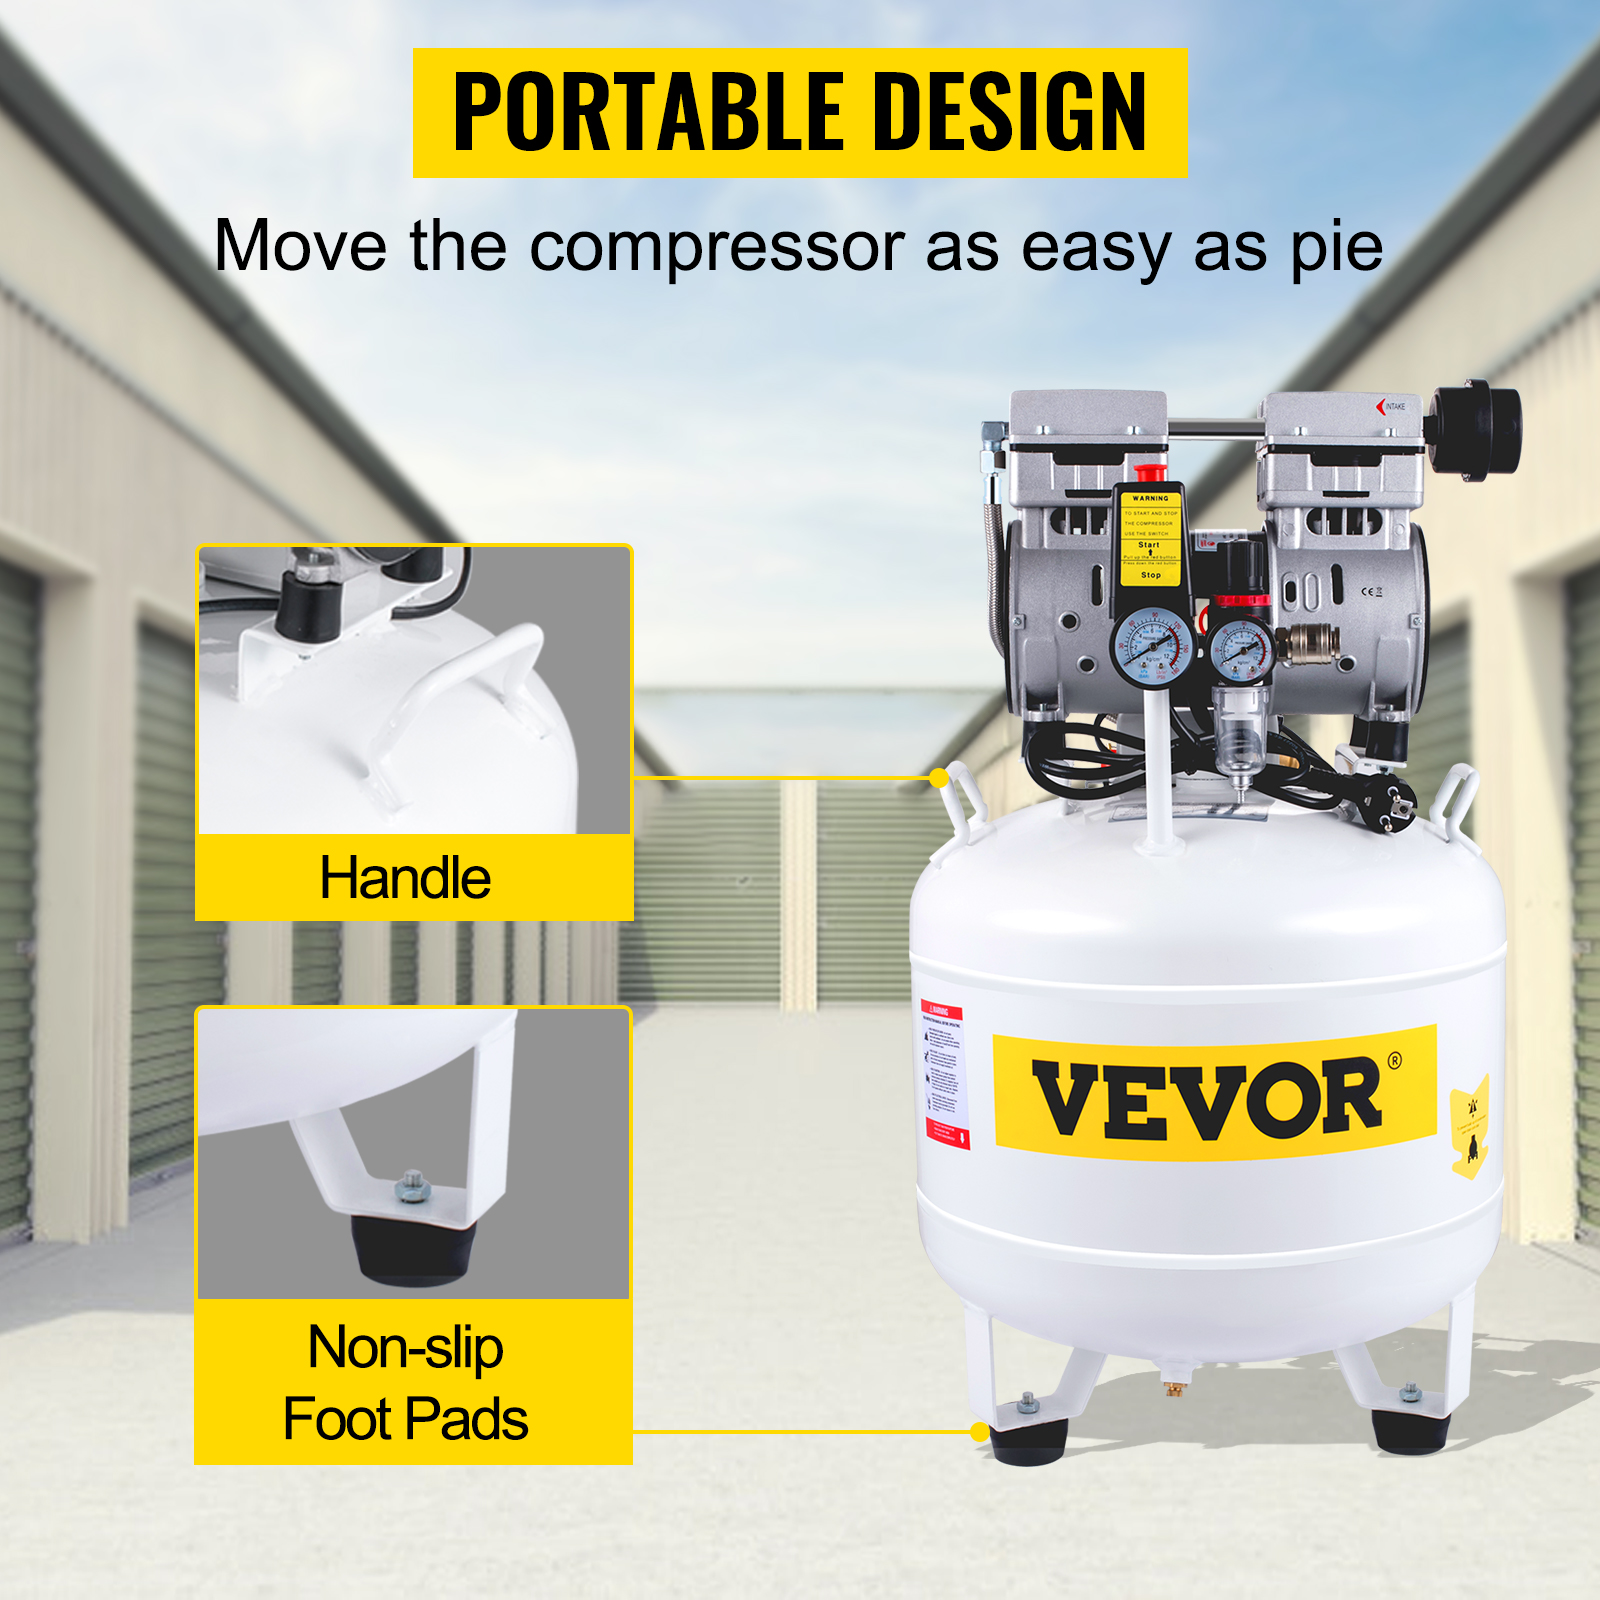 VEVOR VEVOR PCP Air Compressor, 350W 2700 RPM Portable Diving Compressor,  4500 Psi High Pressure w/8 mm Quick Connector & Built-in Cooling Fan, 1.5L  Tank Auto-shutoff Design Powered by Home & Car